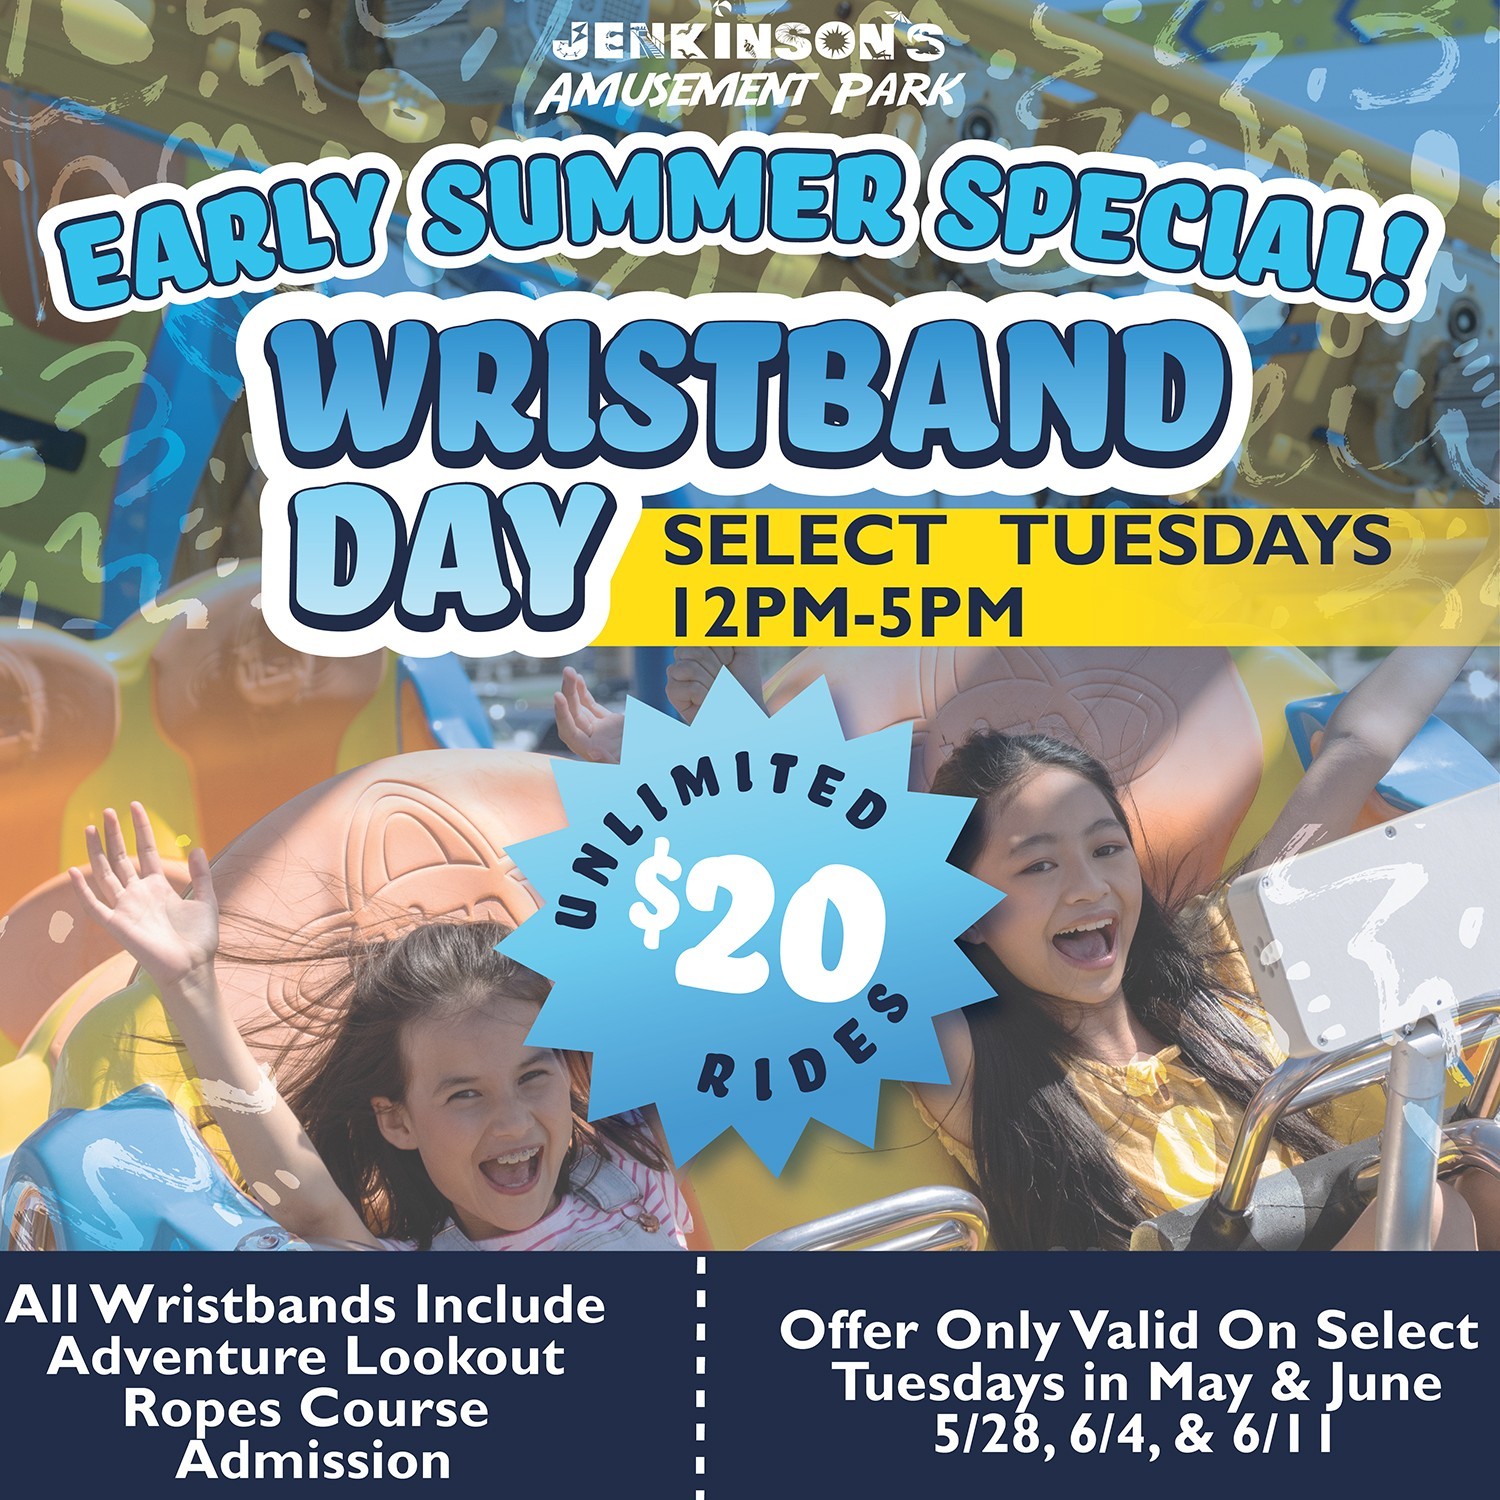 Flyer for early summer special wristband day, featuring colorful design and discount details.